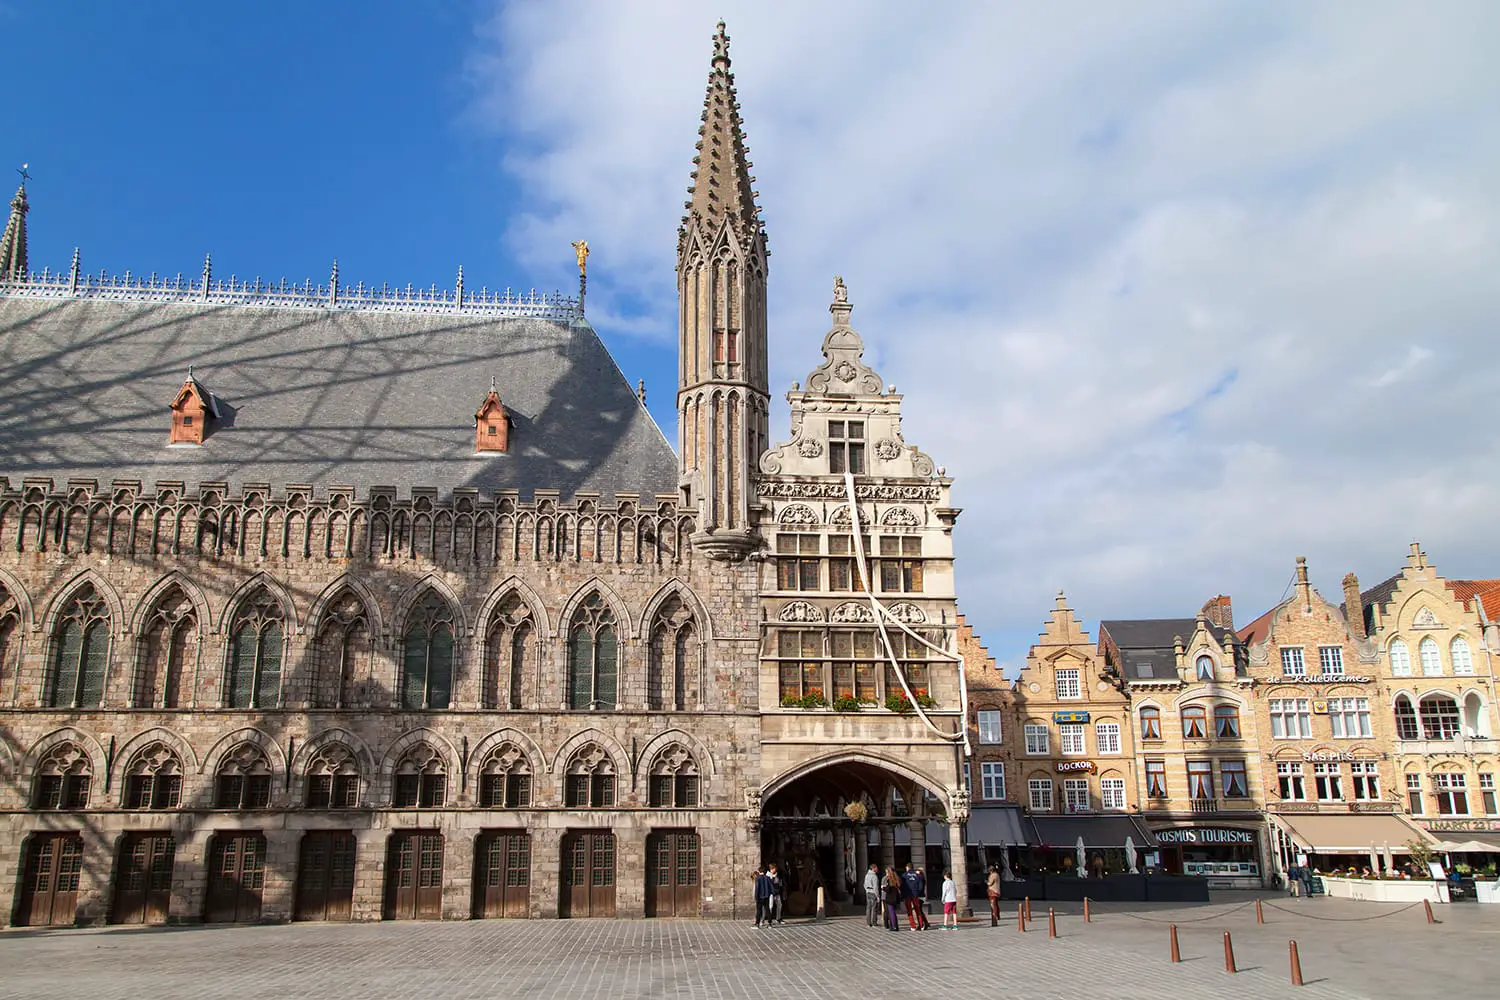 Grote Markt of Ypres, Belgium, with part of the Cloth Hall building on the left and the renaissance building Nieuwerck on the center